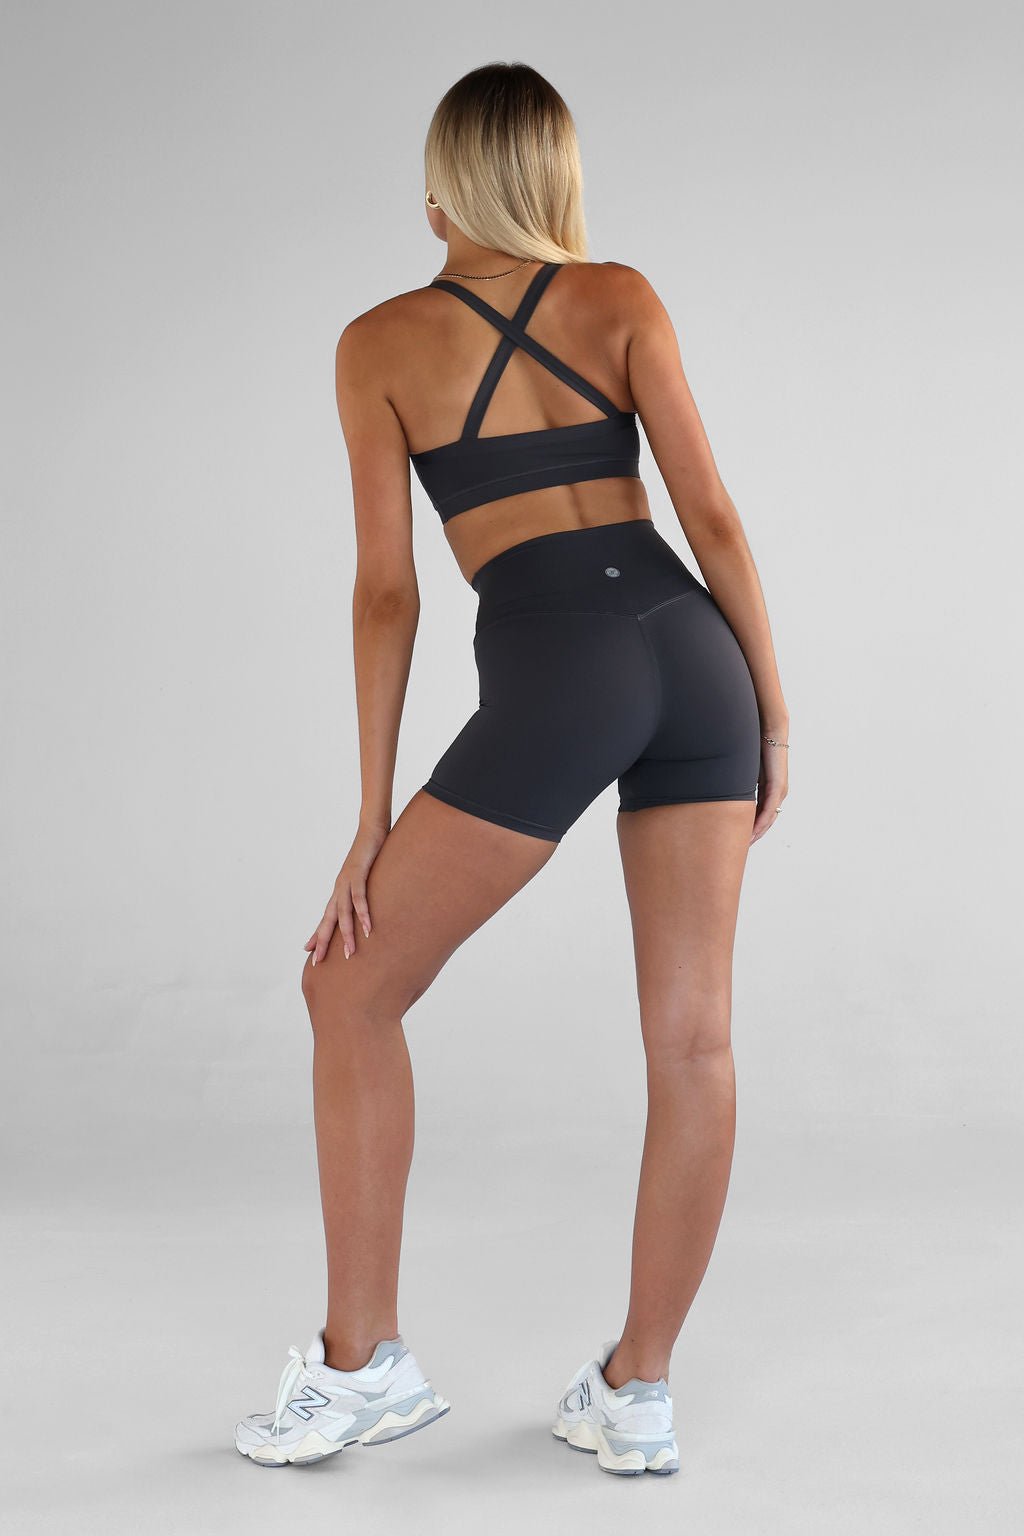 SCULPT Cross Back Crop - Ash SHIPPING FROM 12/02 - LEELO ACTIVE